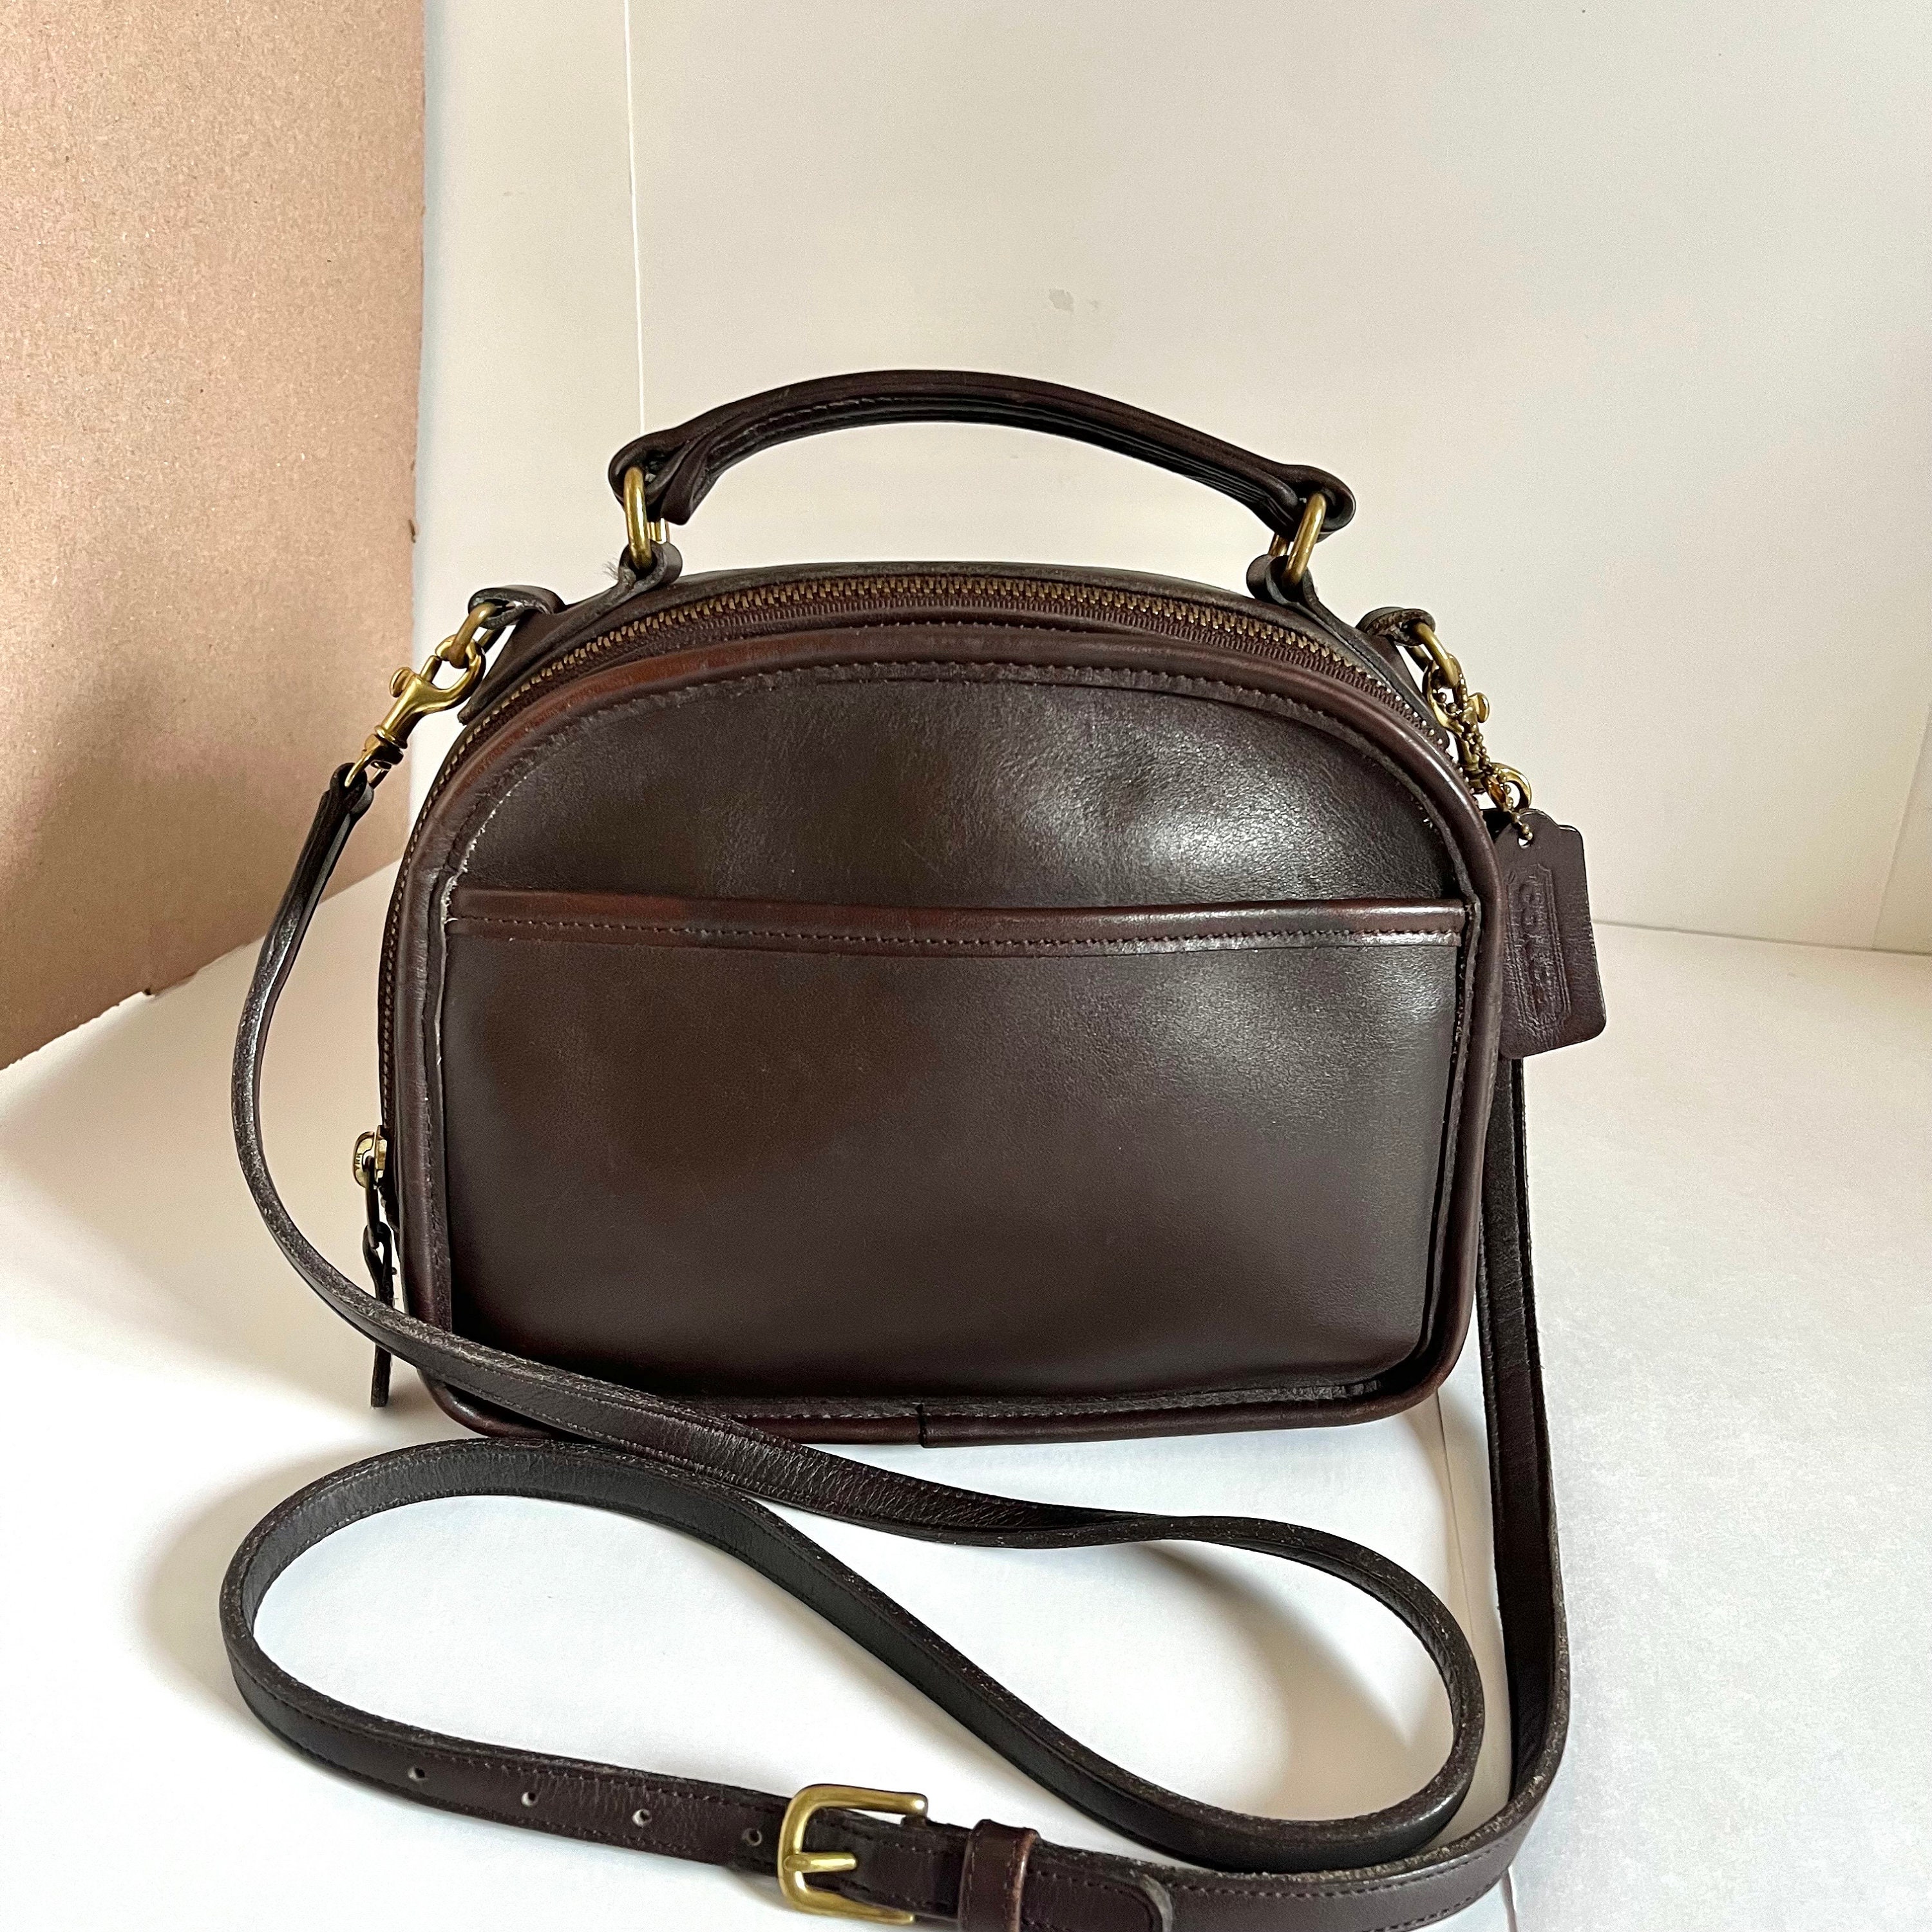 Buy Coach Messenger Bag Online In India -  India